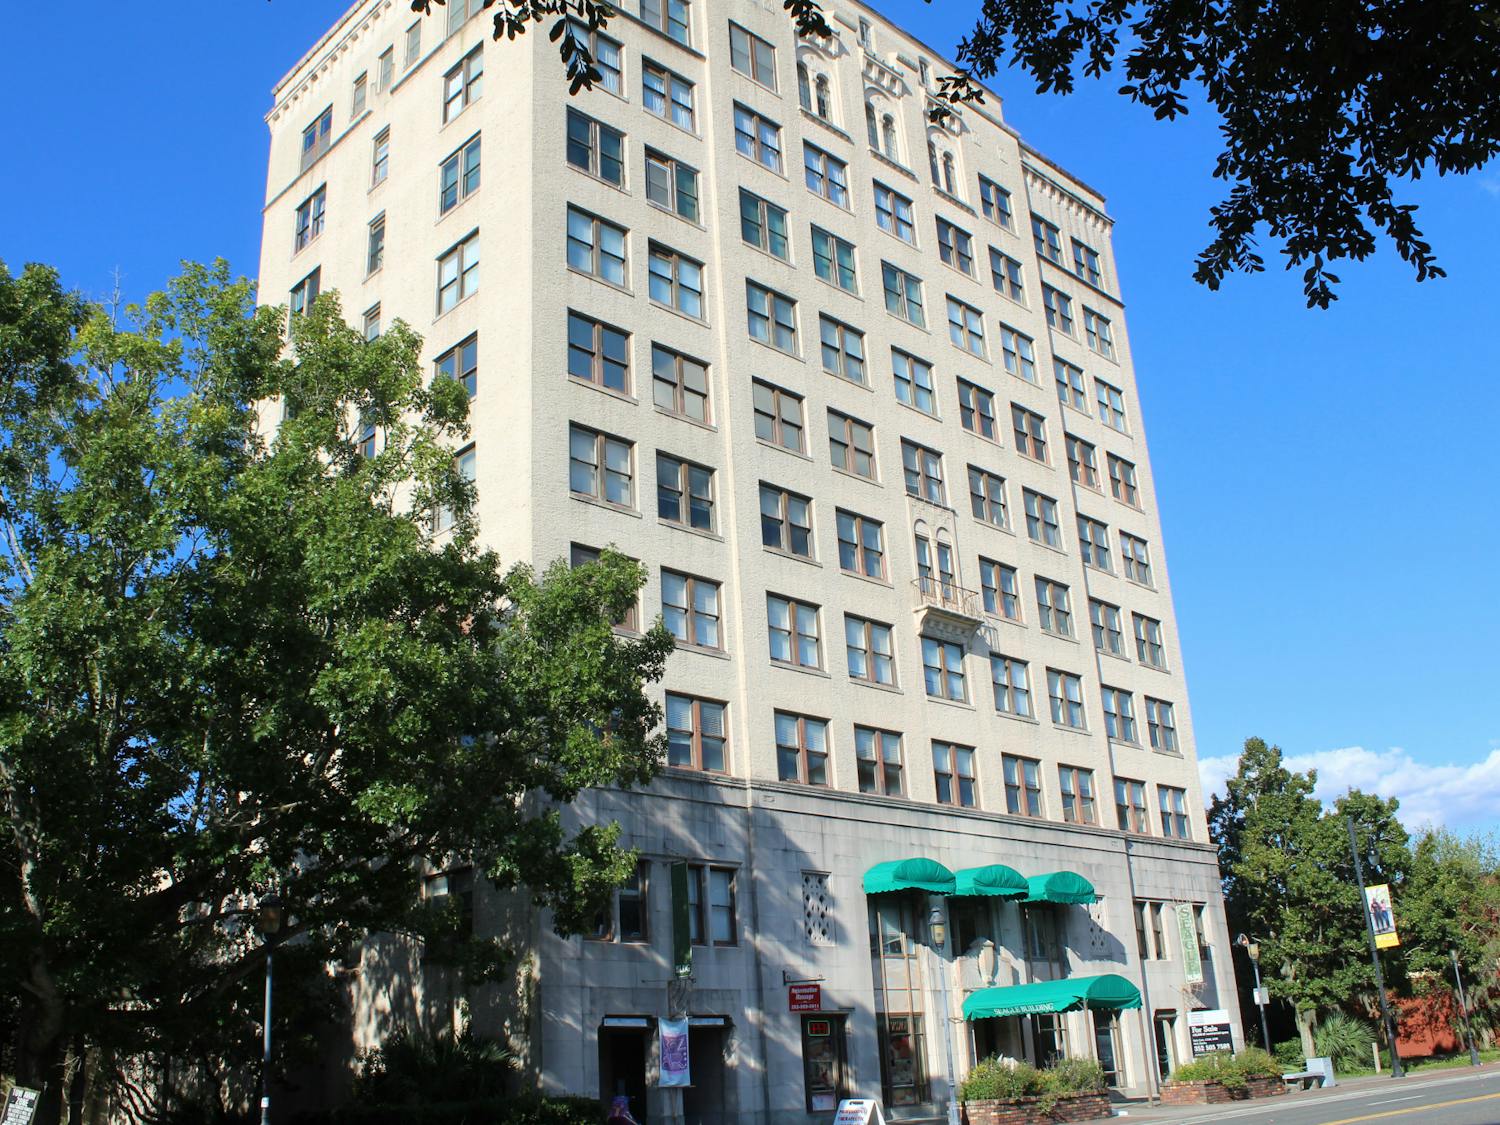 The Seagle Building is seen on Sunday, Sept. 26, 2021.